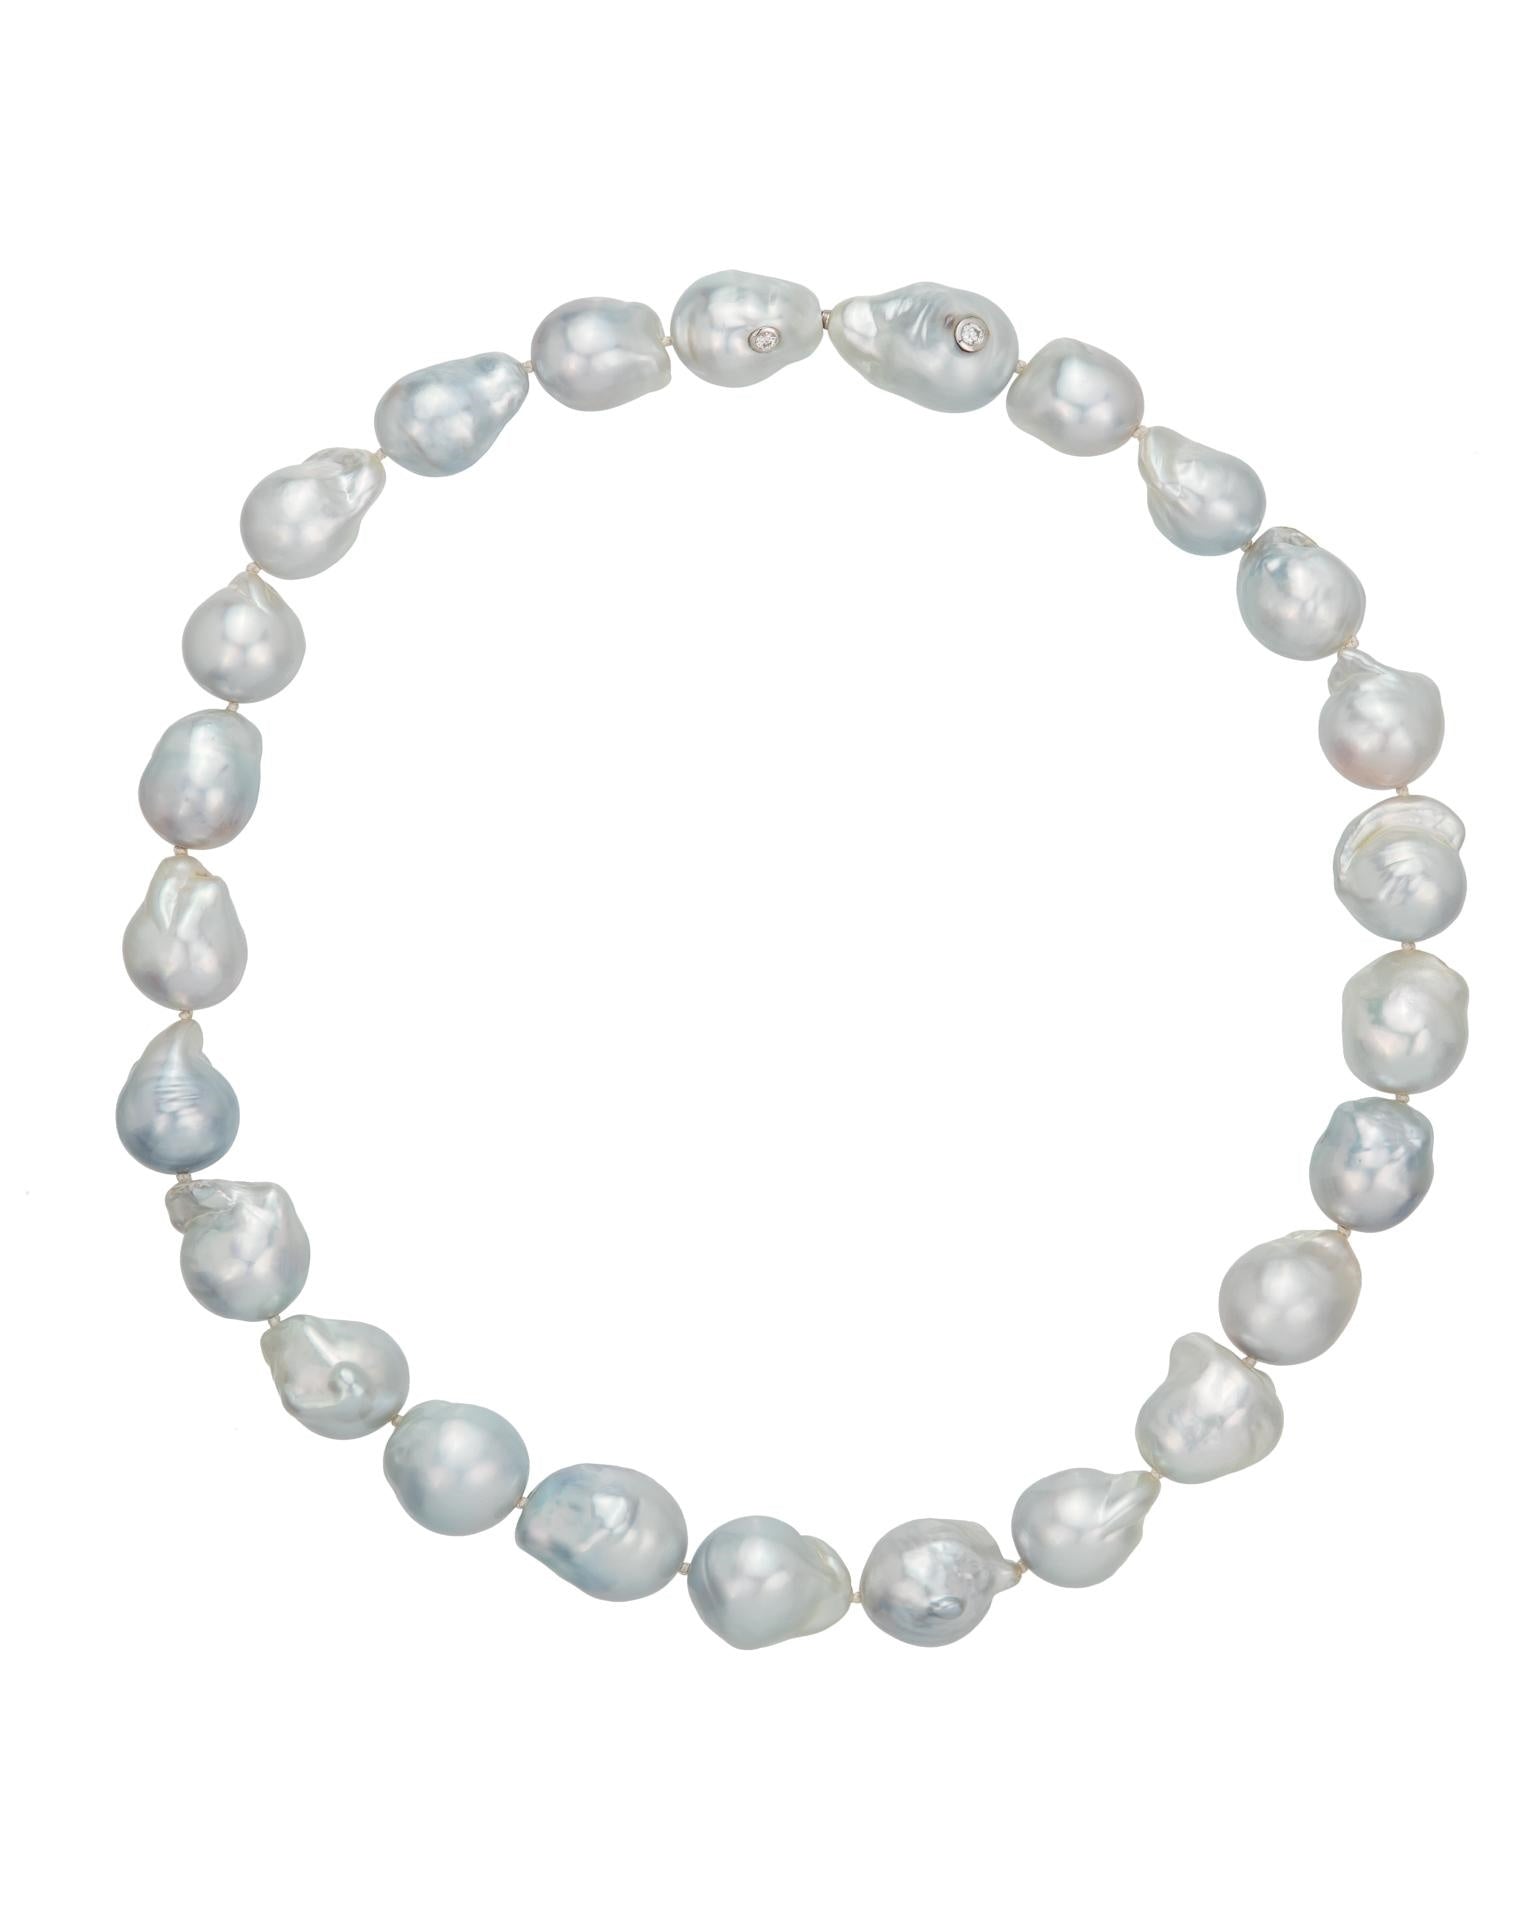 South Sea baroque pearl strand, with hidden bayonet clasp, crafted in